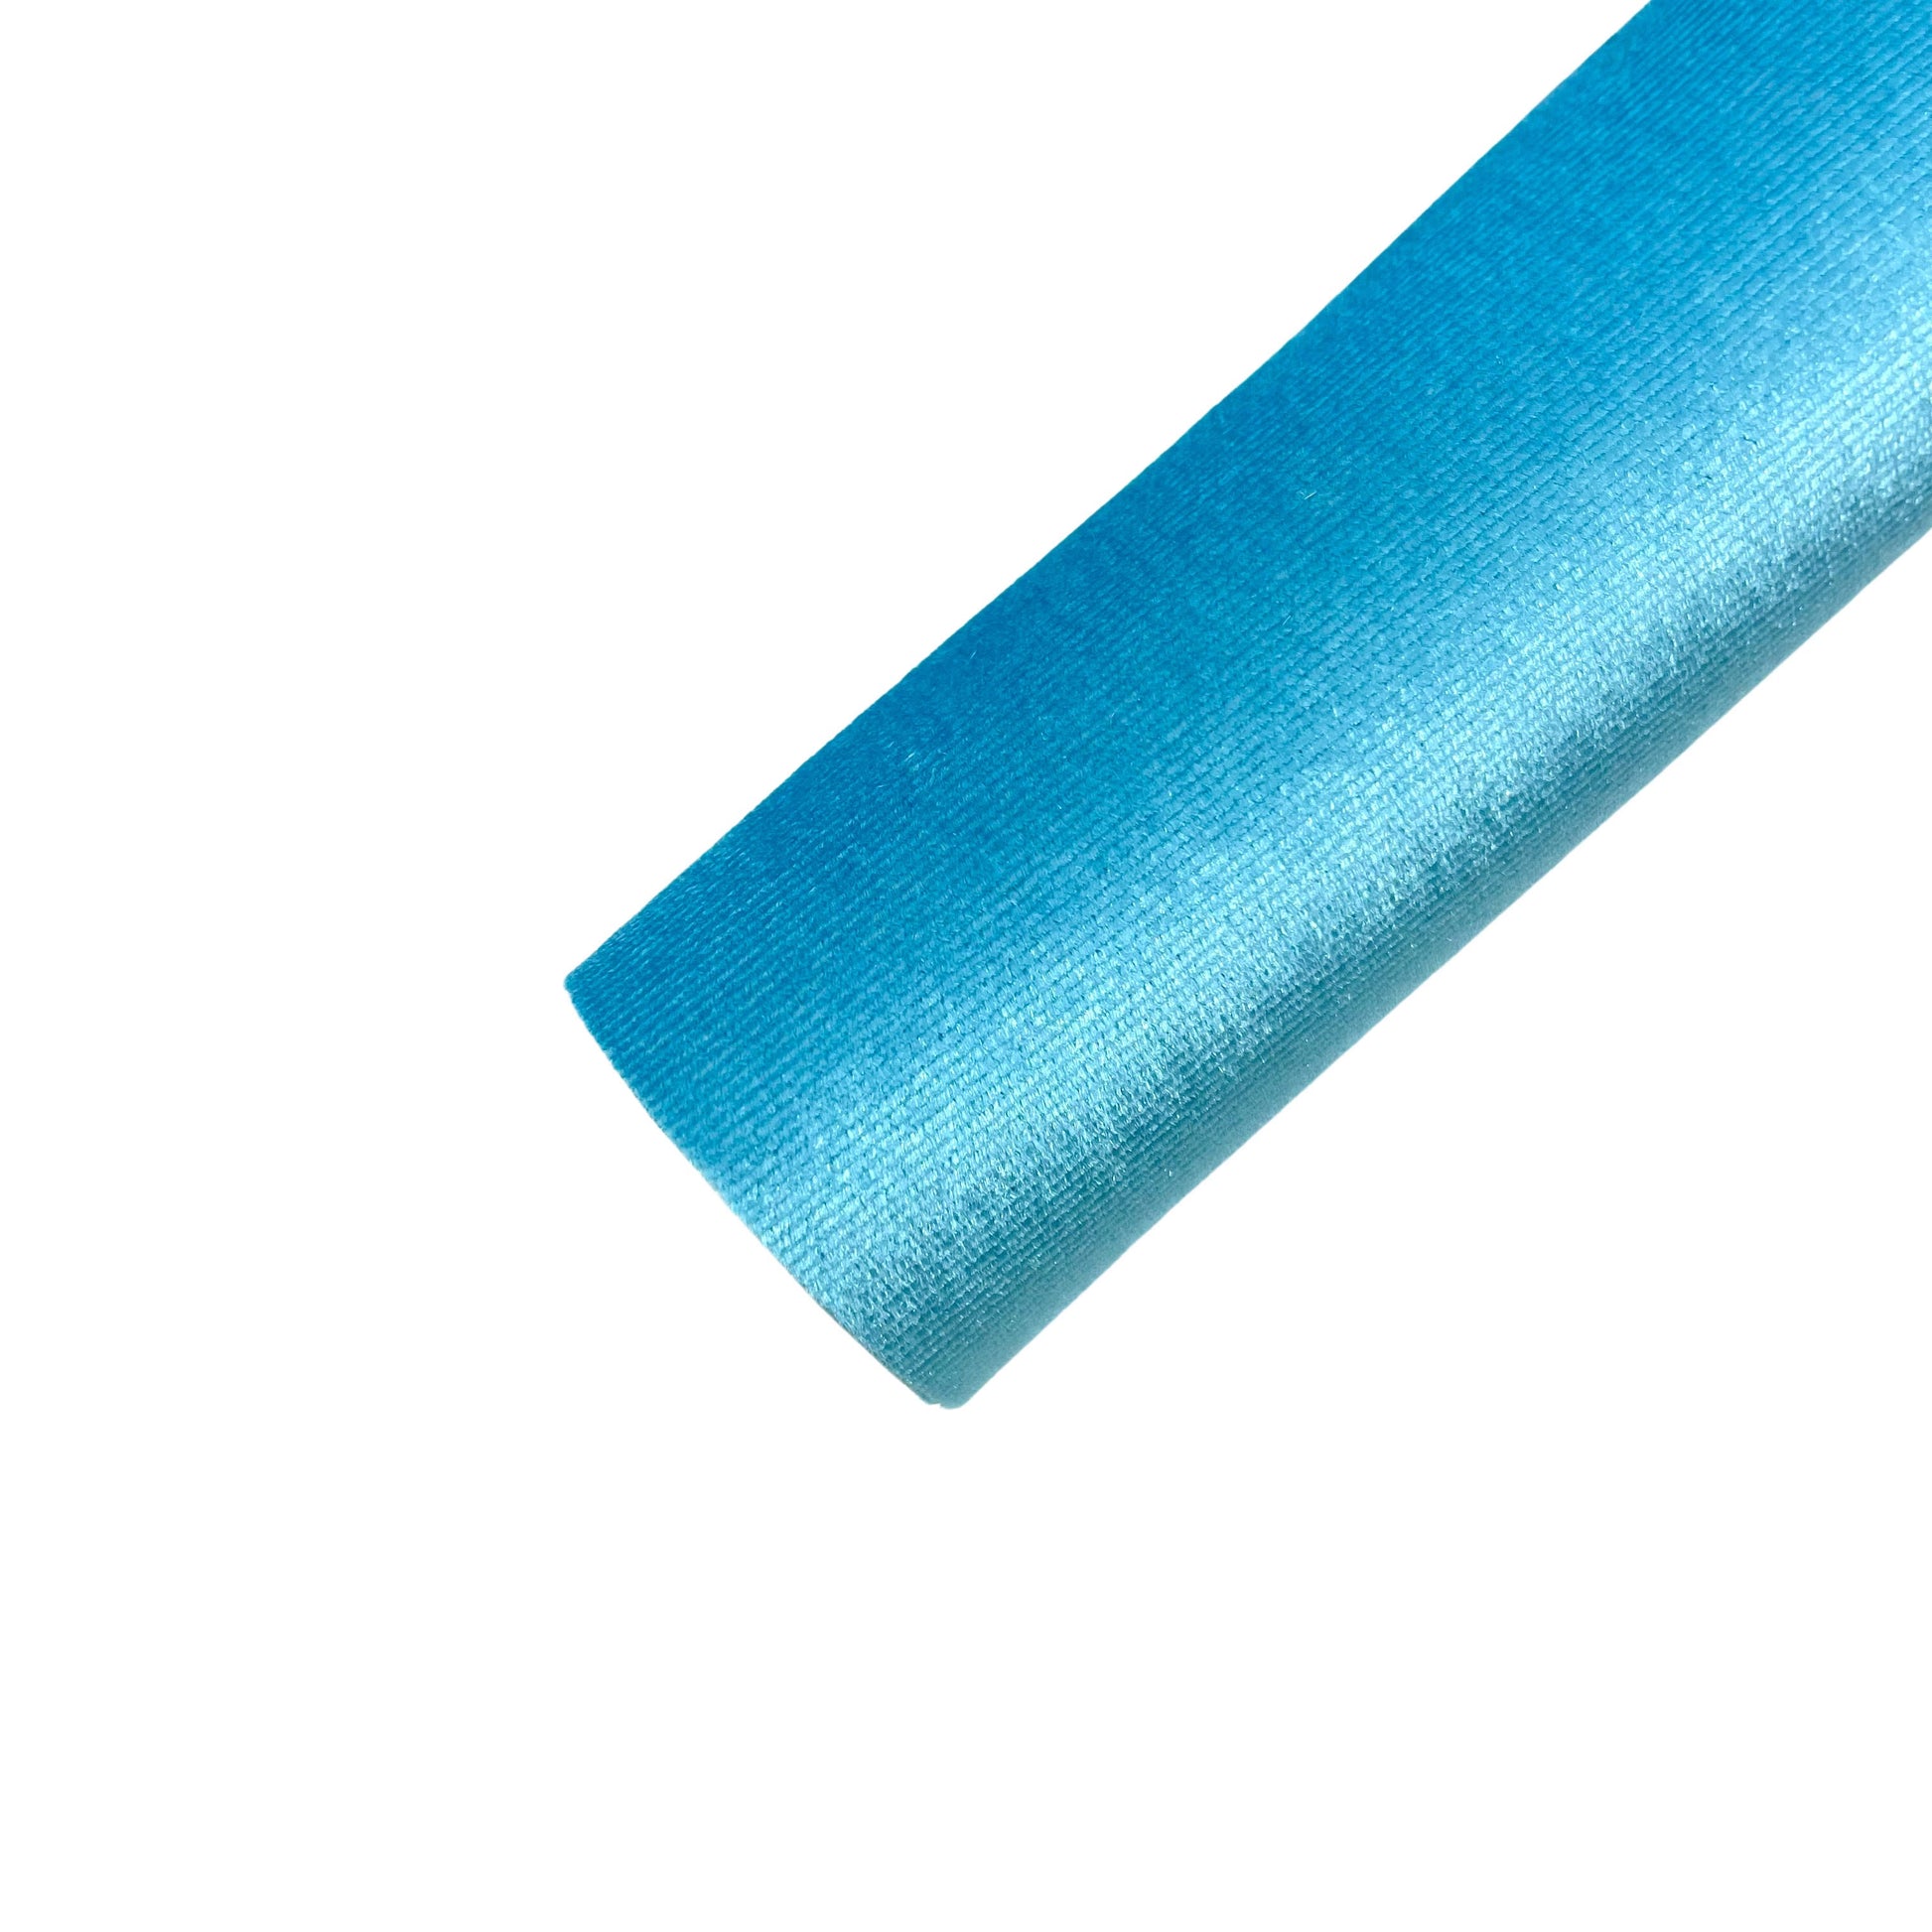 Rolled solid colored velvet sheet in bright ocean blue.